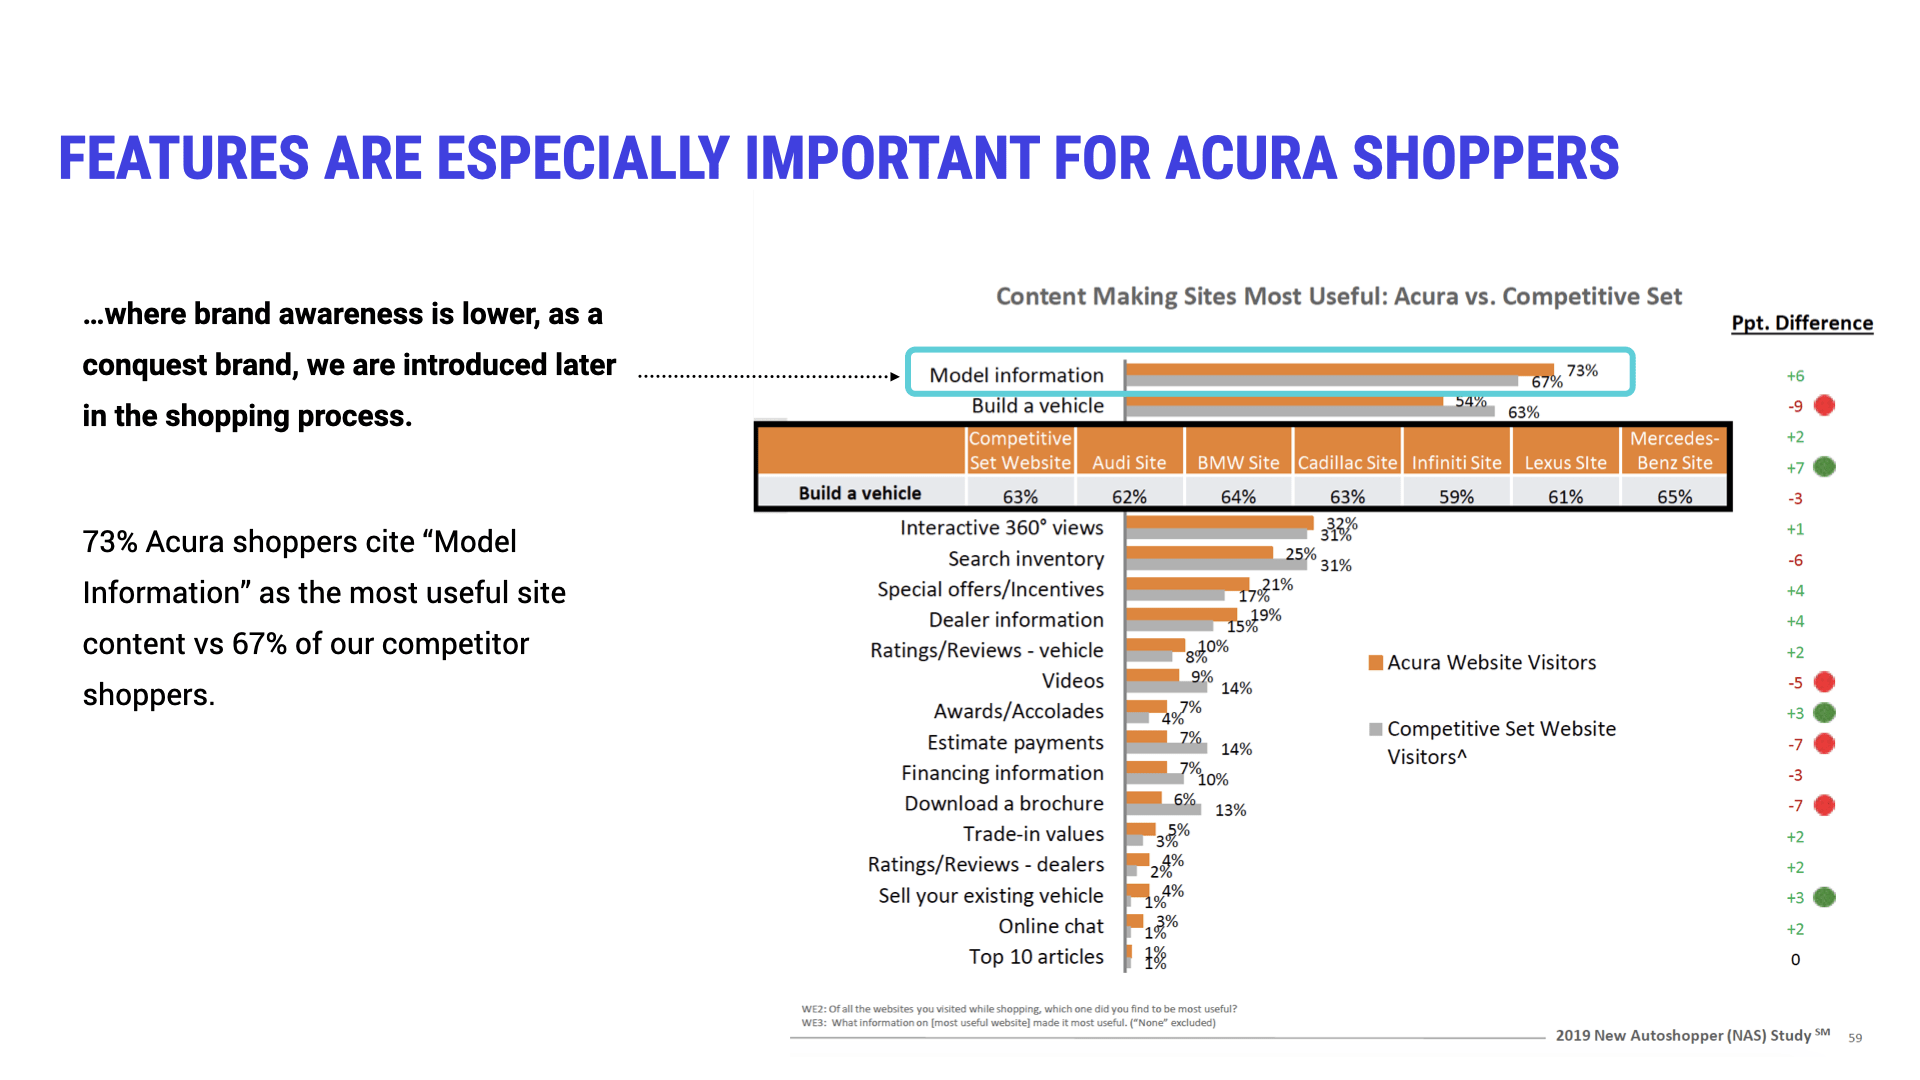 Importance of features to Acura